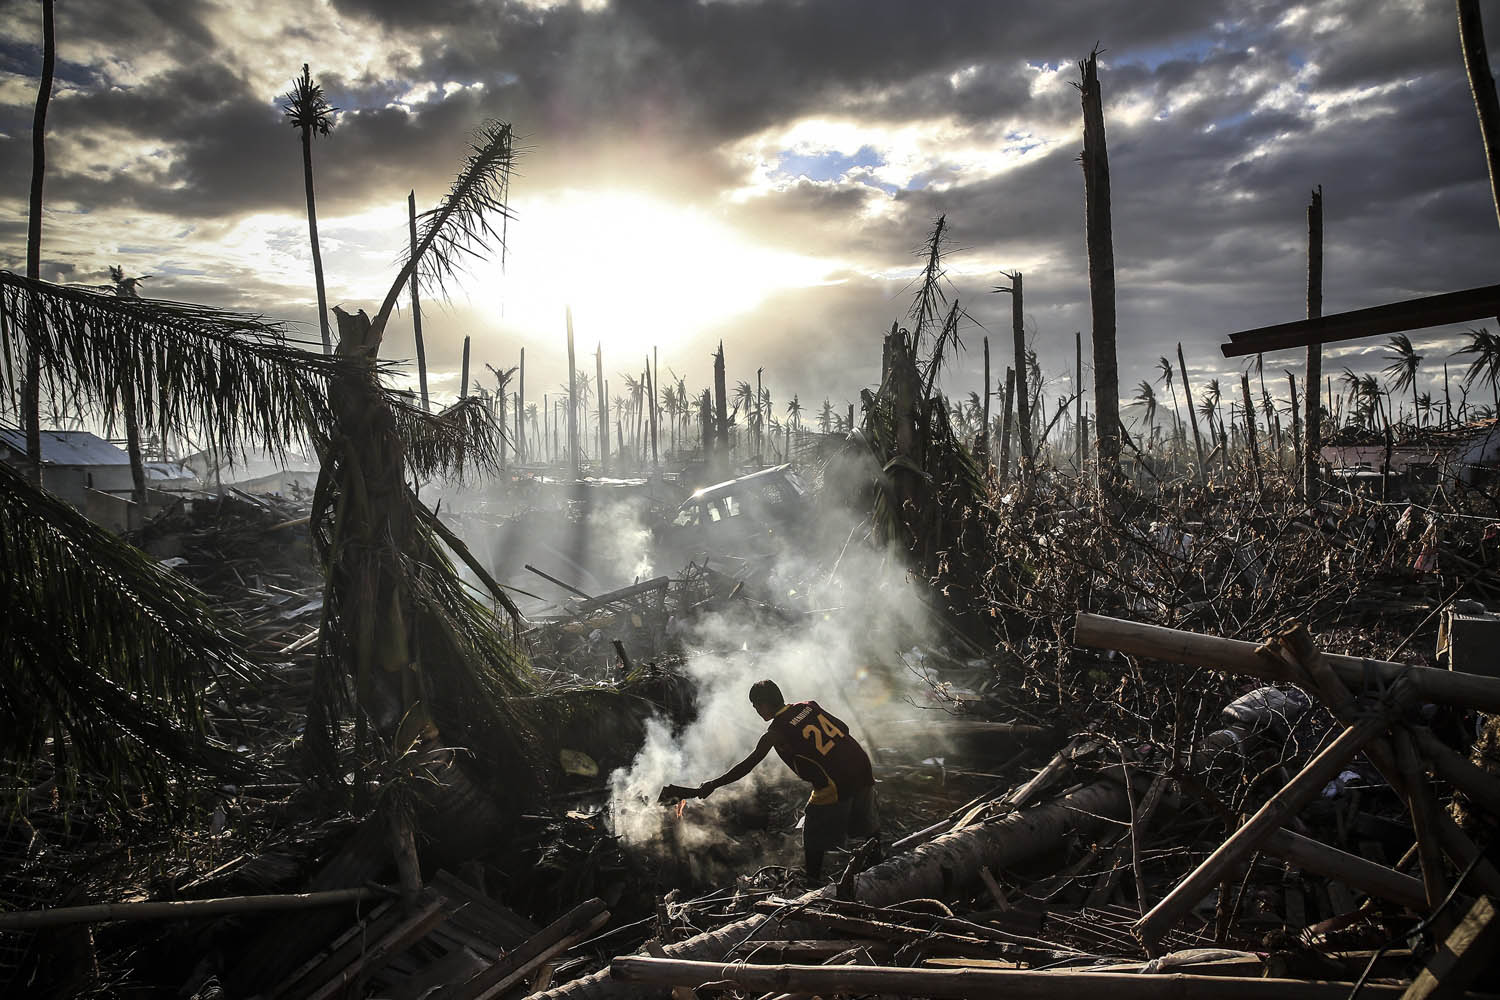 Nov. 19, 2013. A man fans the flames of a fire in Leyte, Philippines.